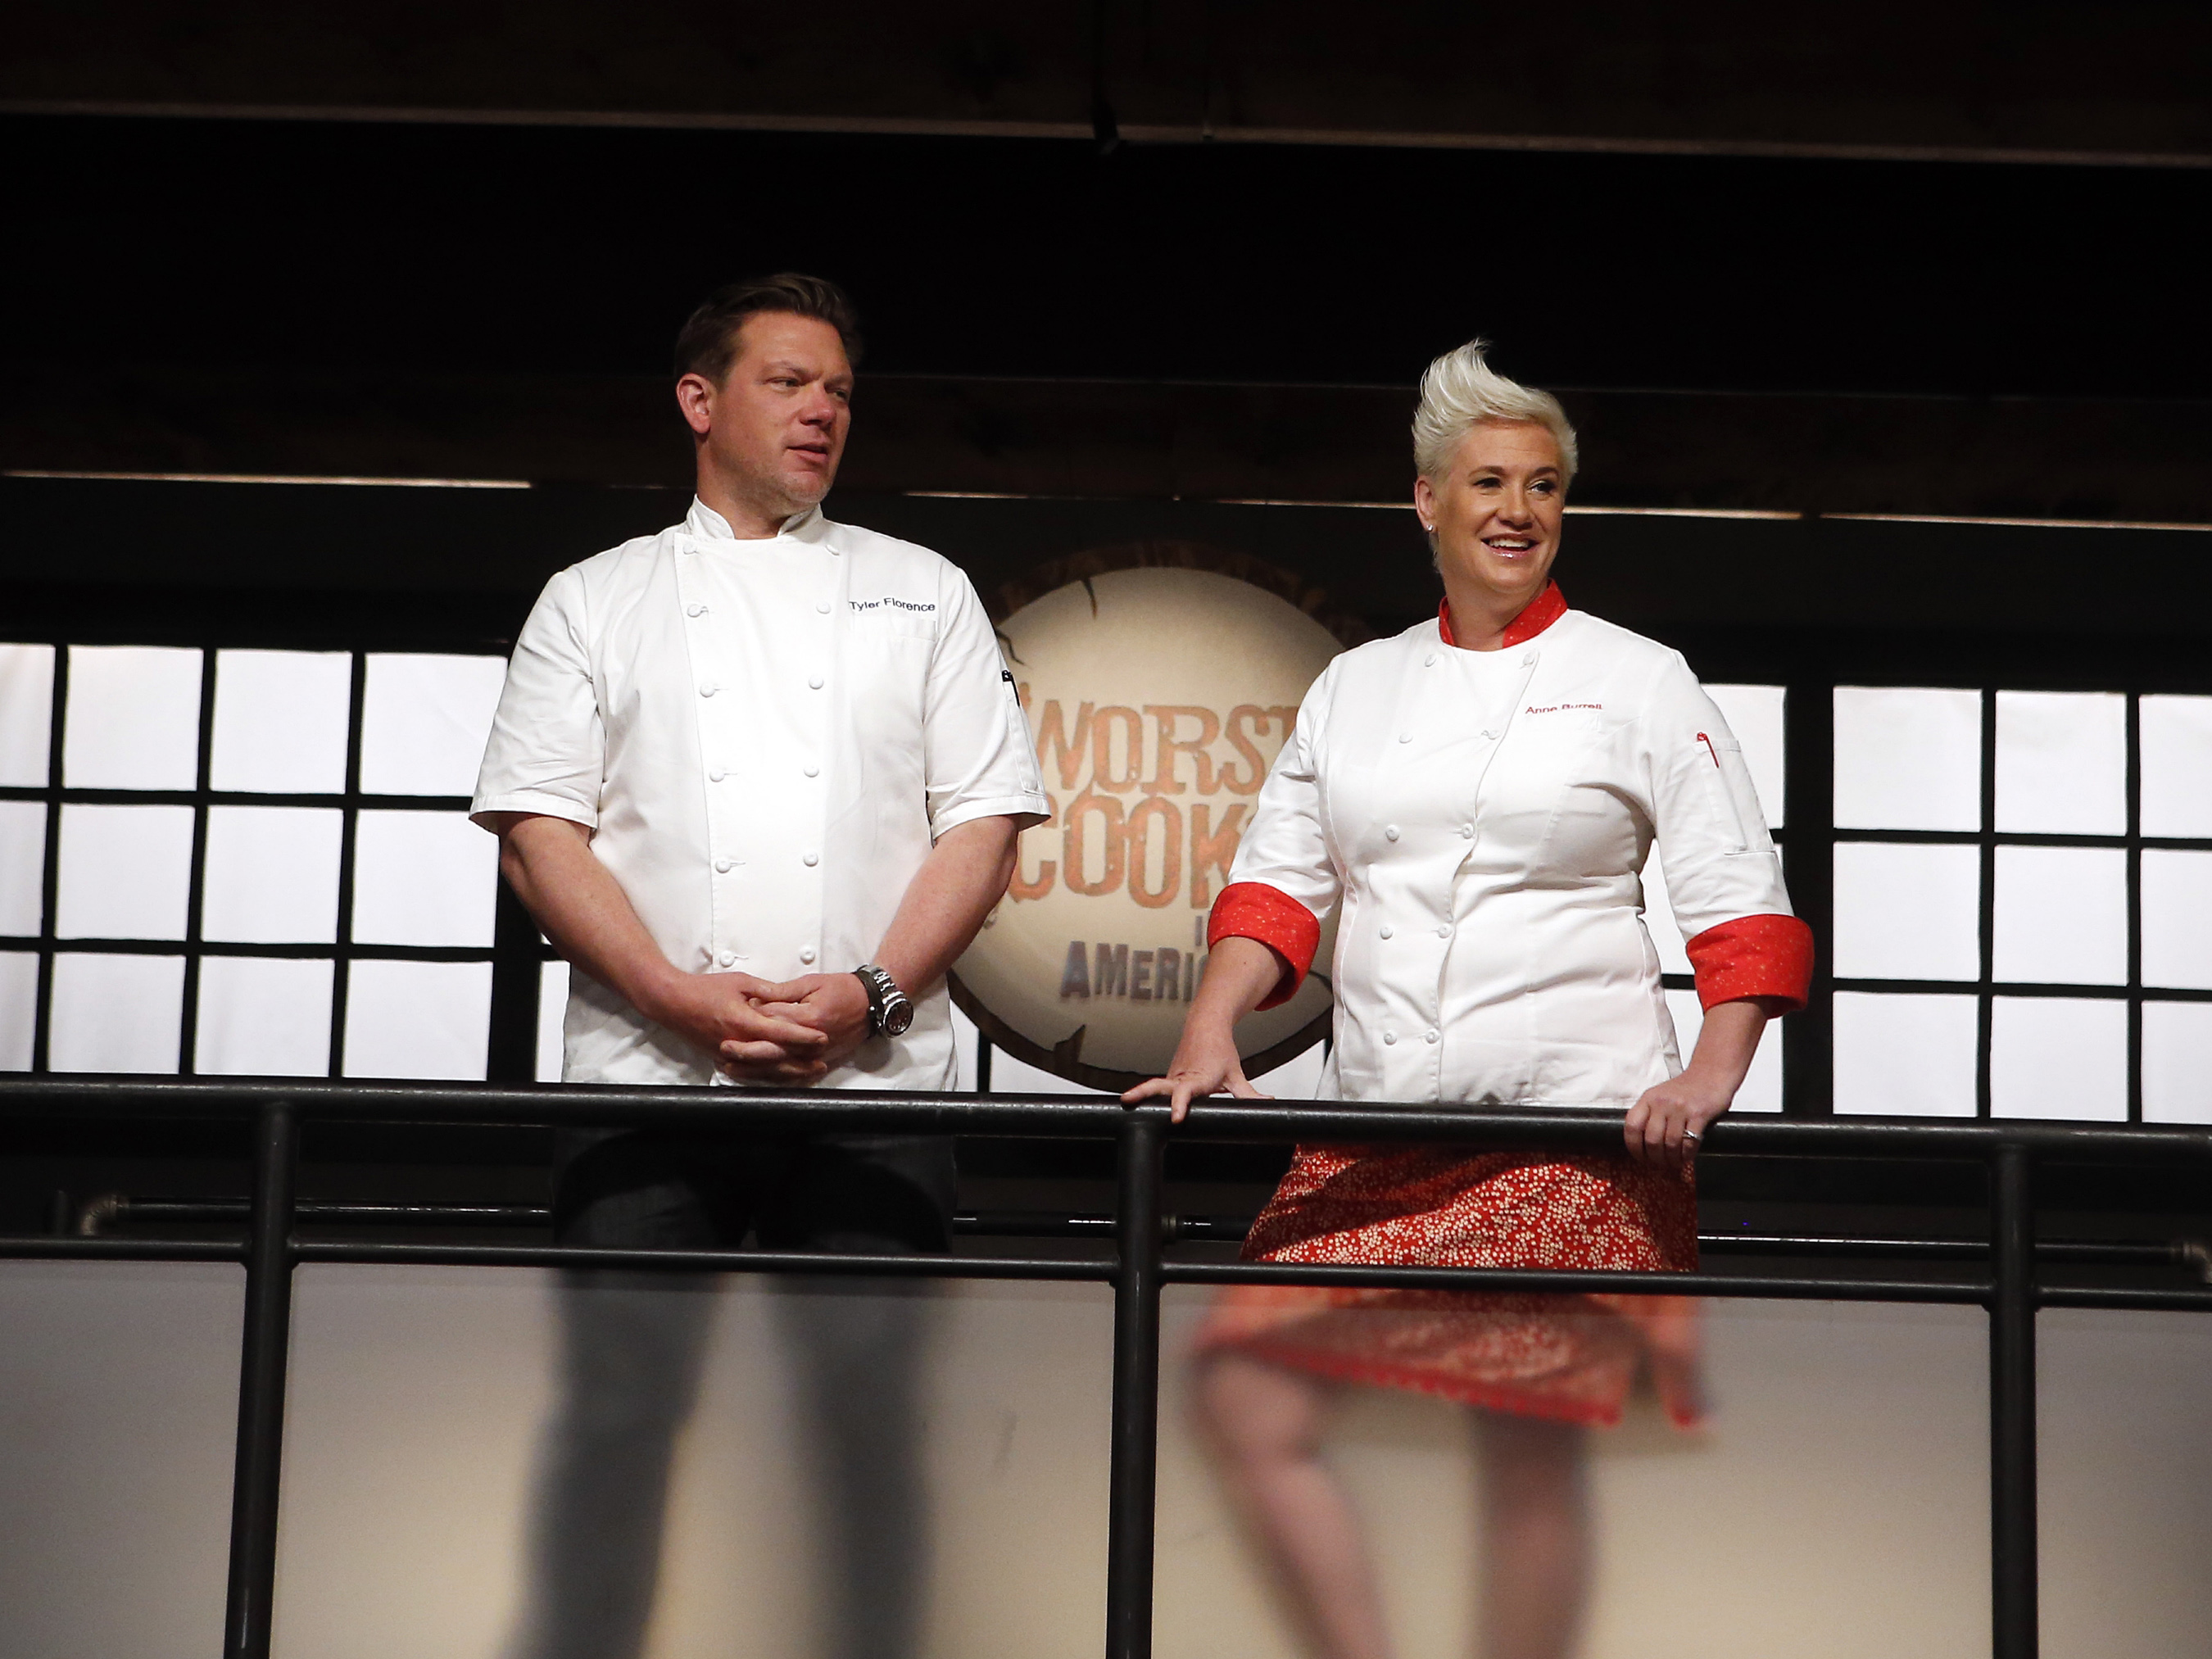 Hosts Tyler Florence and Anne Burrell on Food Network's Worst Cooks in America